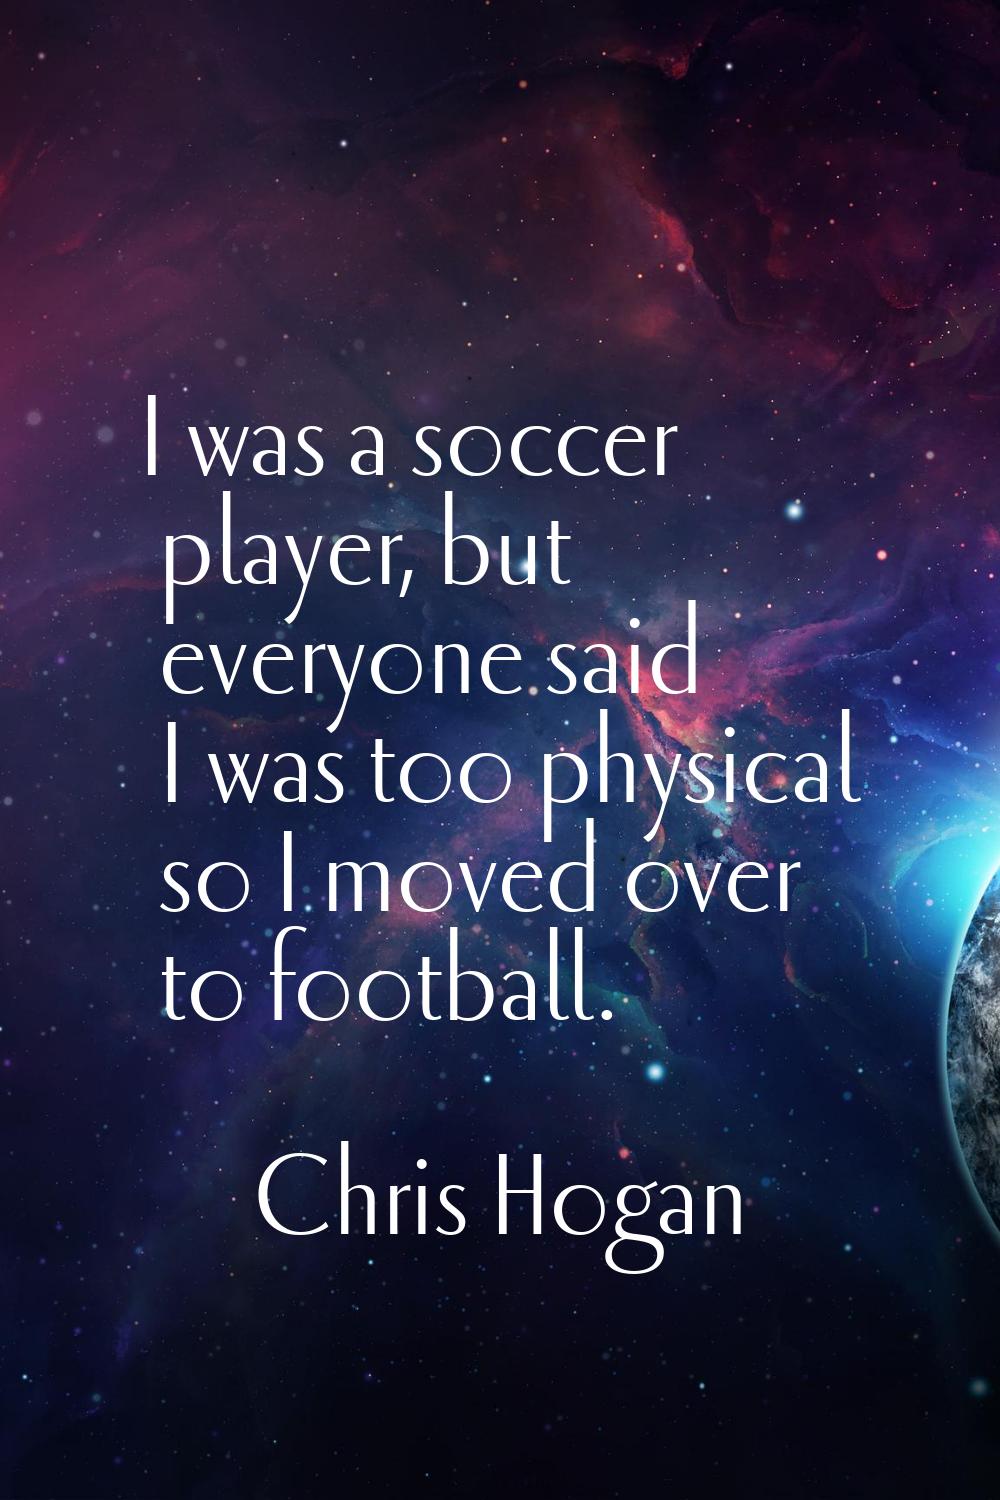 I was a soccer player, but everyone said I was too physical so I moved over to football.